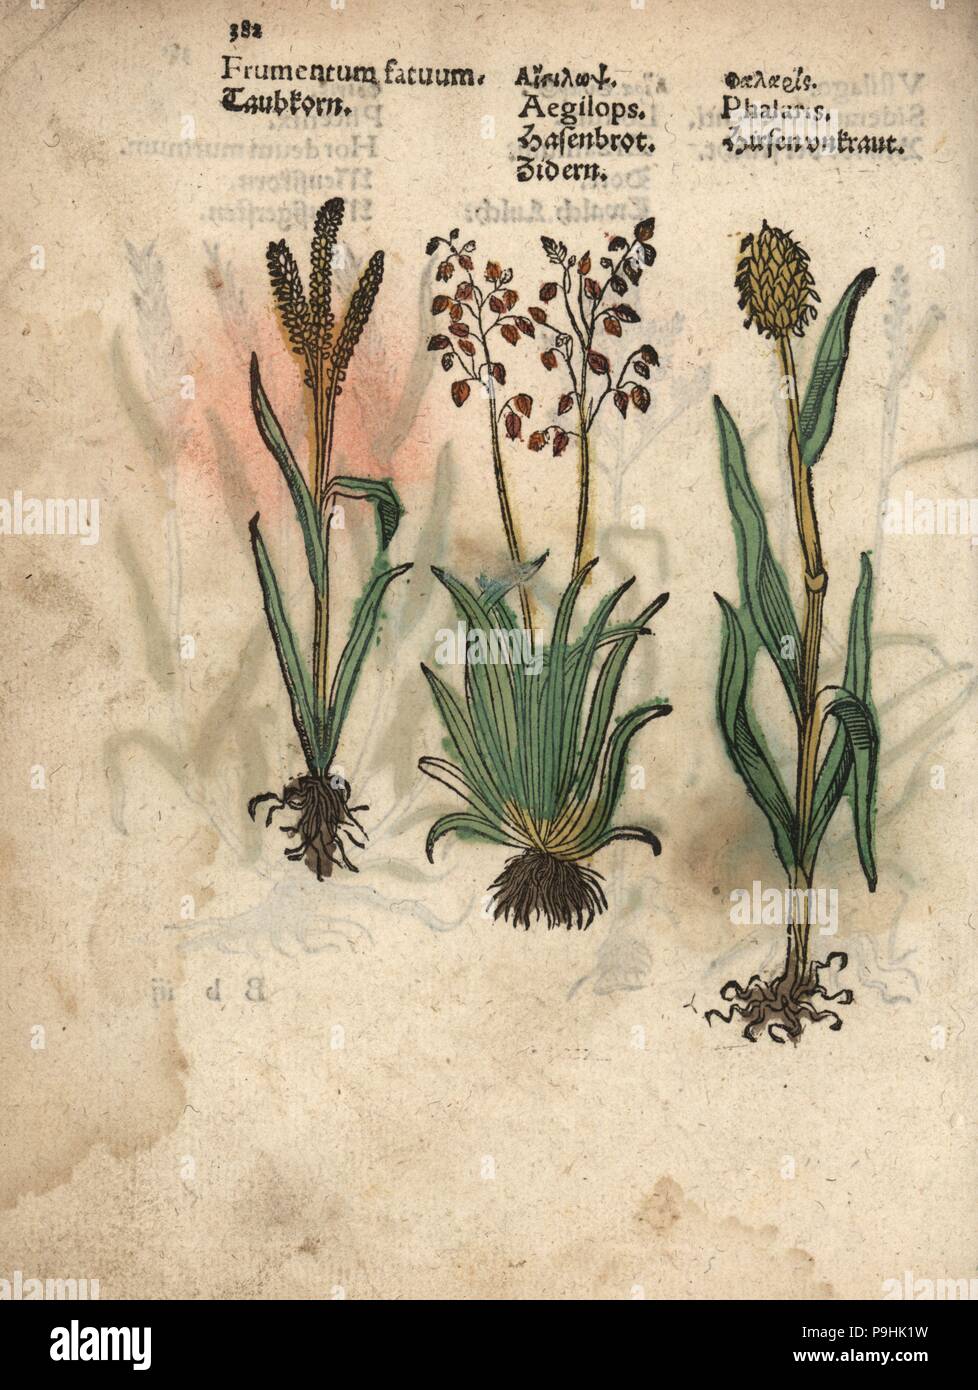 Barley, Hordeum vulgare, barren brome, Bromus sterilis, and Canary grass, Phalaris canariensis. Handcoloured woodblock engraving of a botanical illustration from Adam Lonicer's Krauterbuch, or Herbal, Frankfurt, 1557. This from a 17th century pirate edition or atlas of illustrations only, with captions in Latin, Greek, French, Italian, German, and in English manuscript. Stock Photo